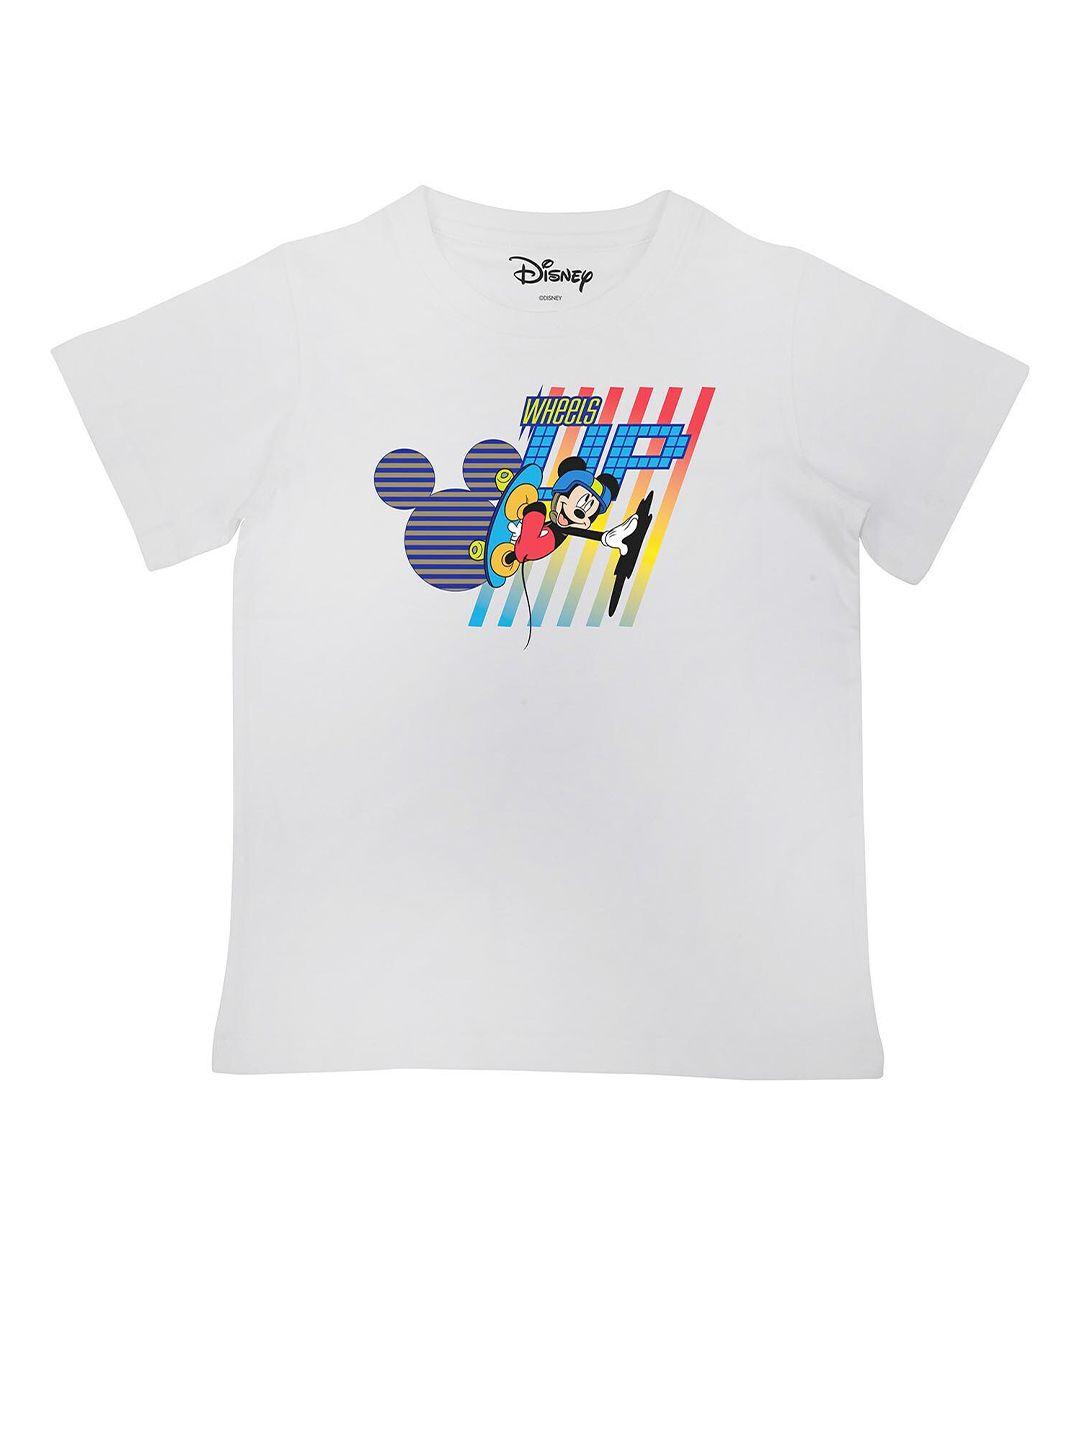 disney-by-wear-your-mind-boys-white-printed-v-neck-t-shirt